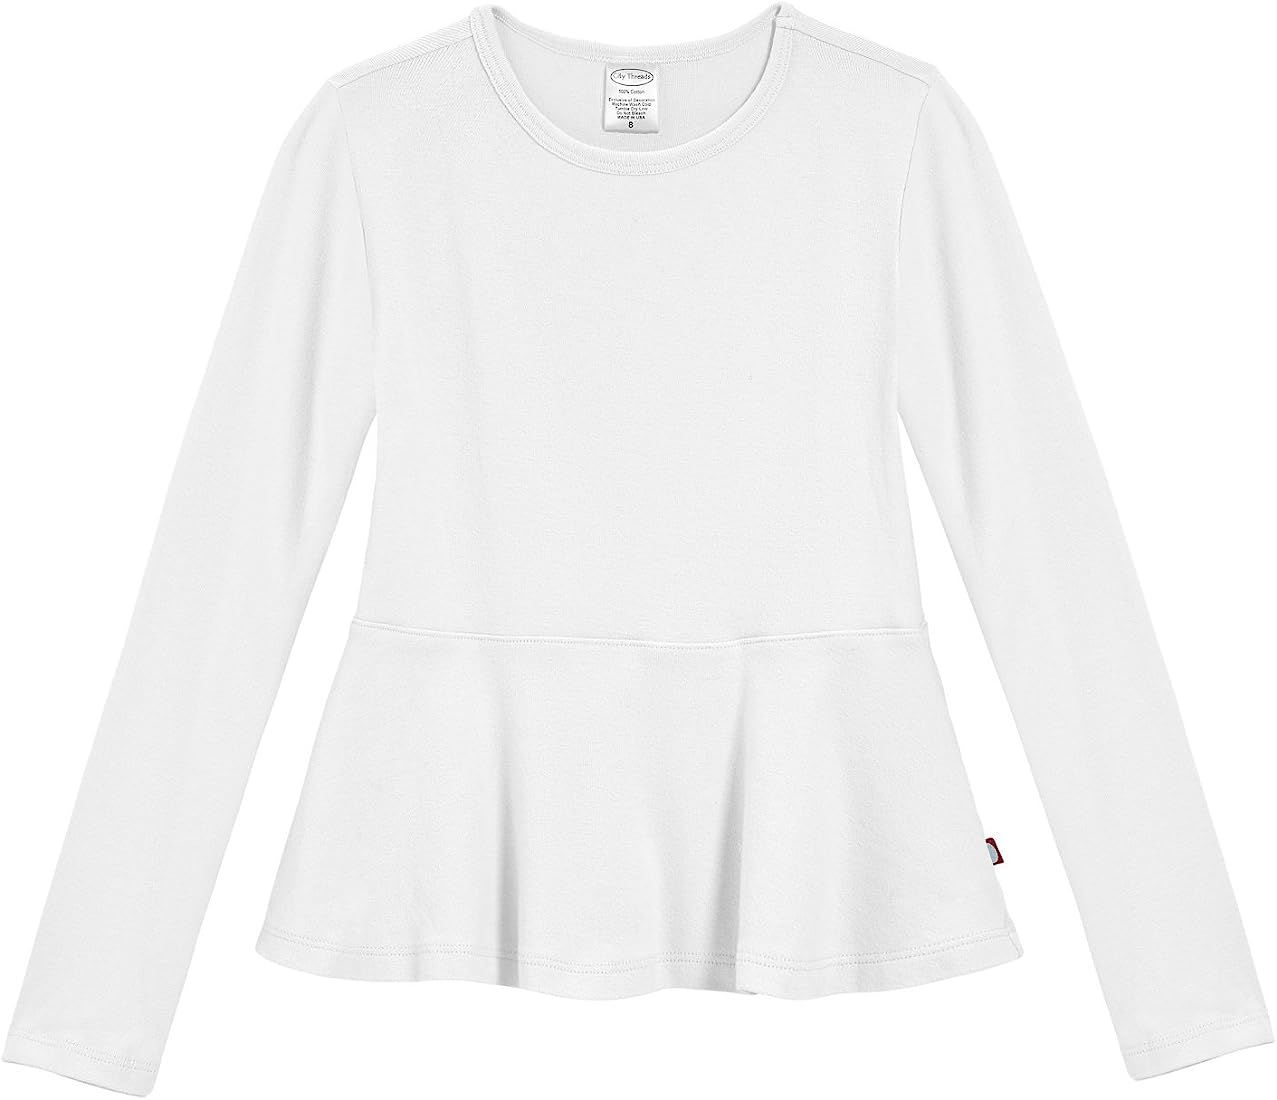 Girls Cotton Jersey Long Sleeve Pepum Shirt for Kids and Toddlers - Solid Colors - Made in The USA | Amazon (US)